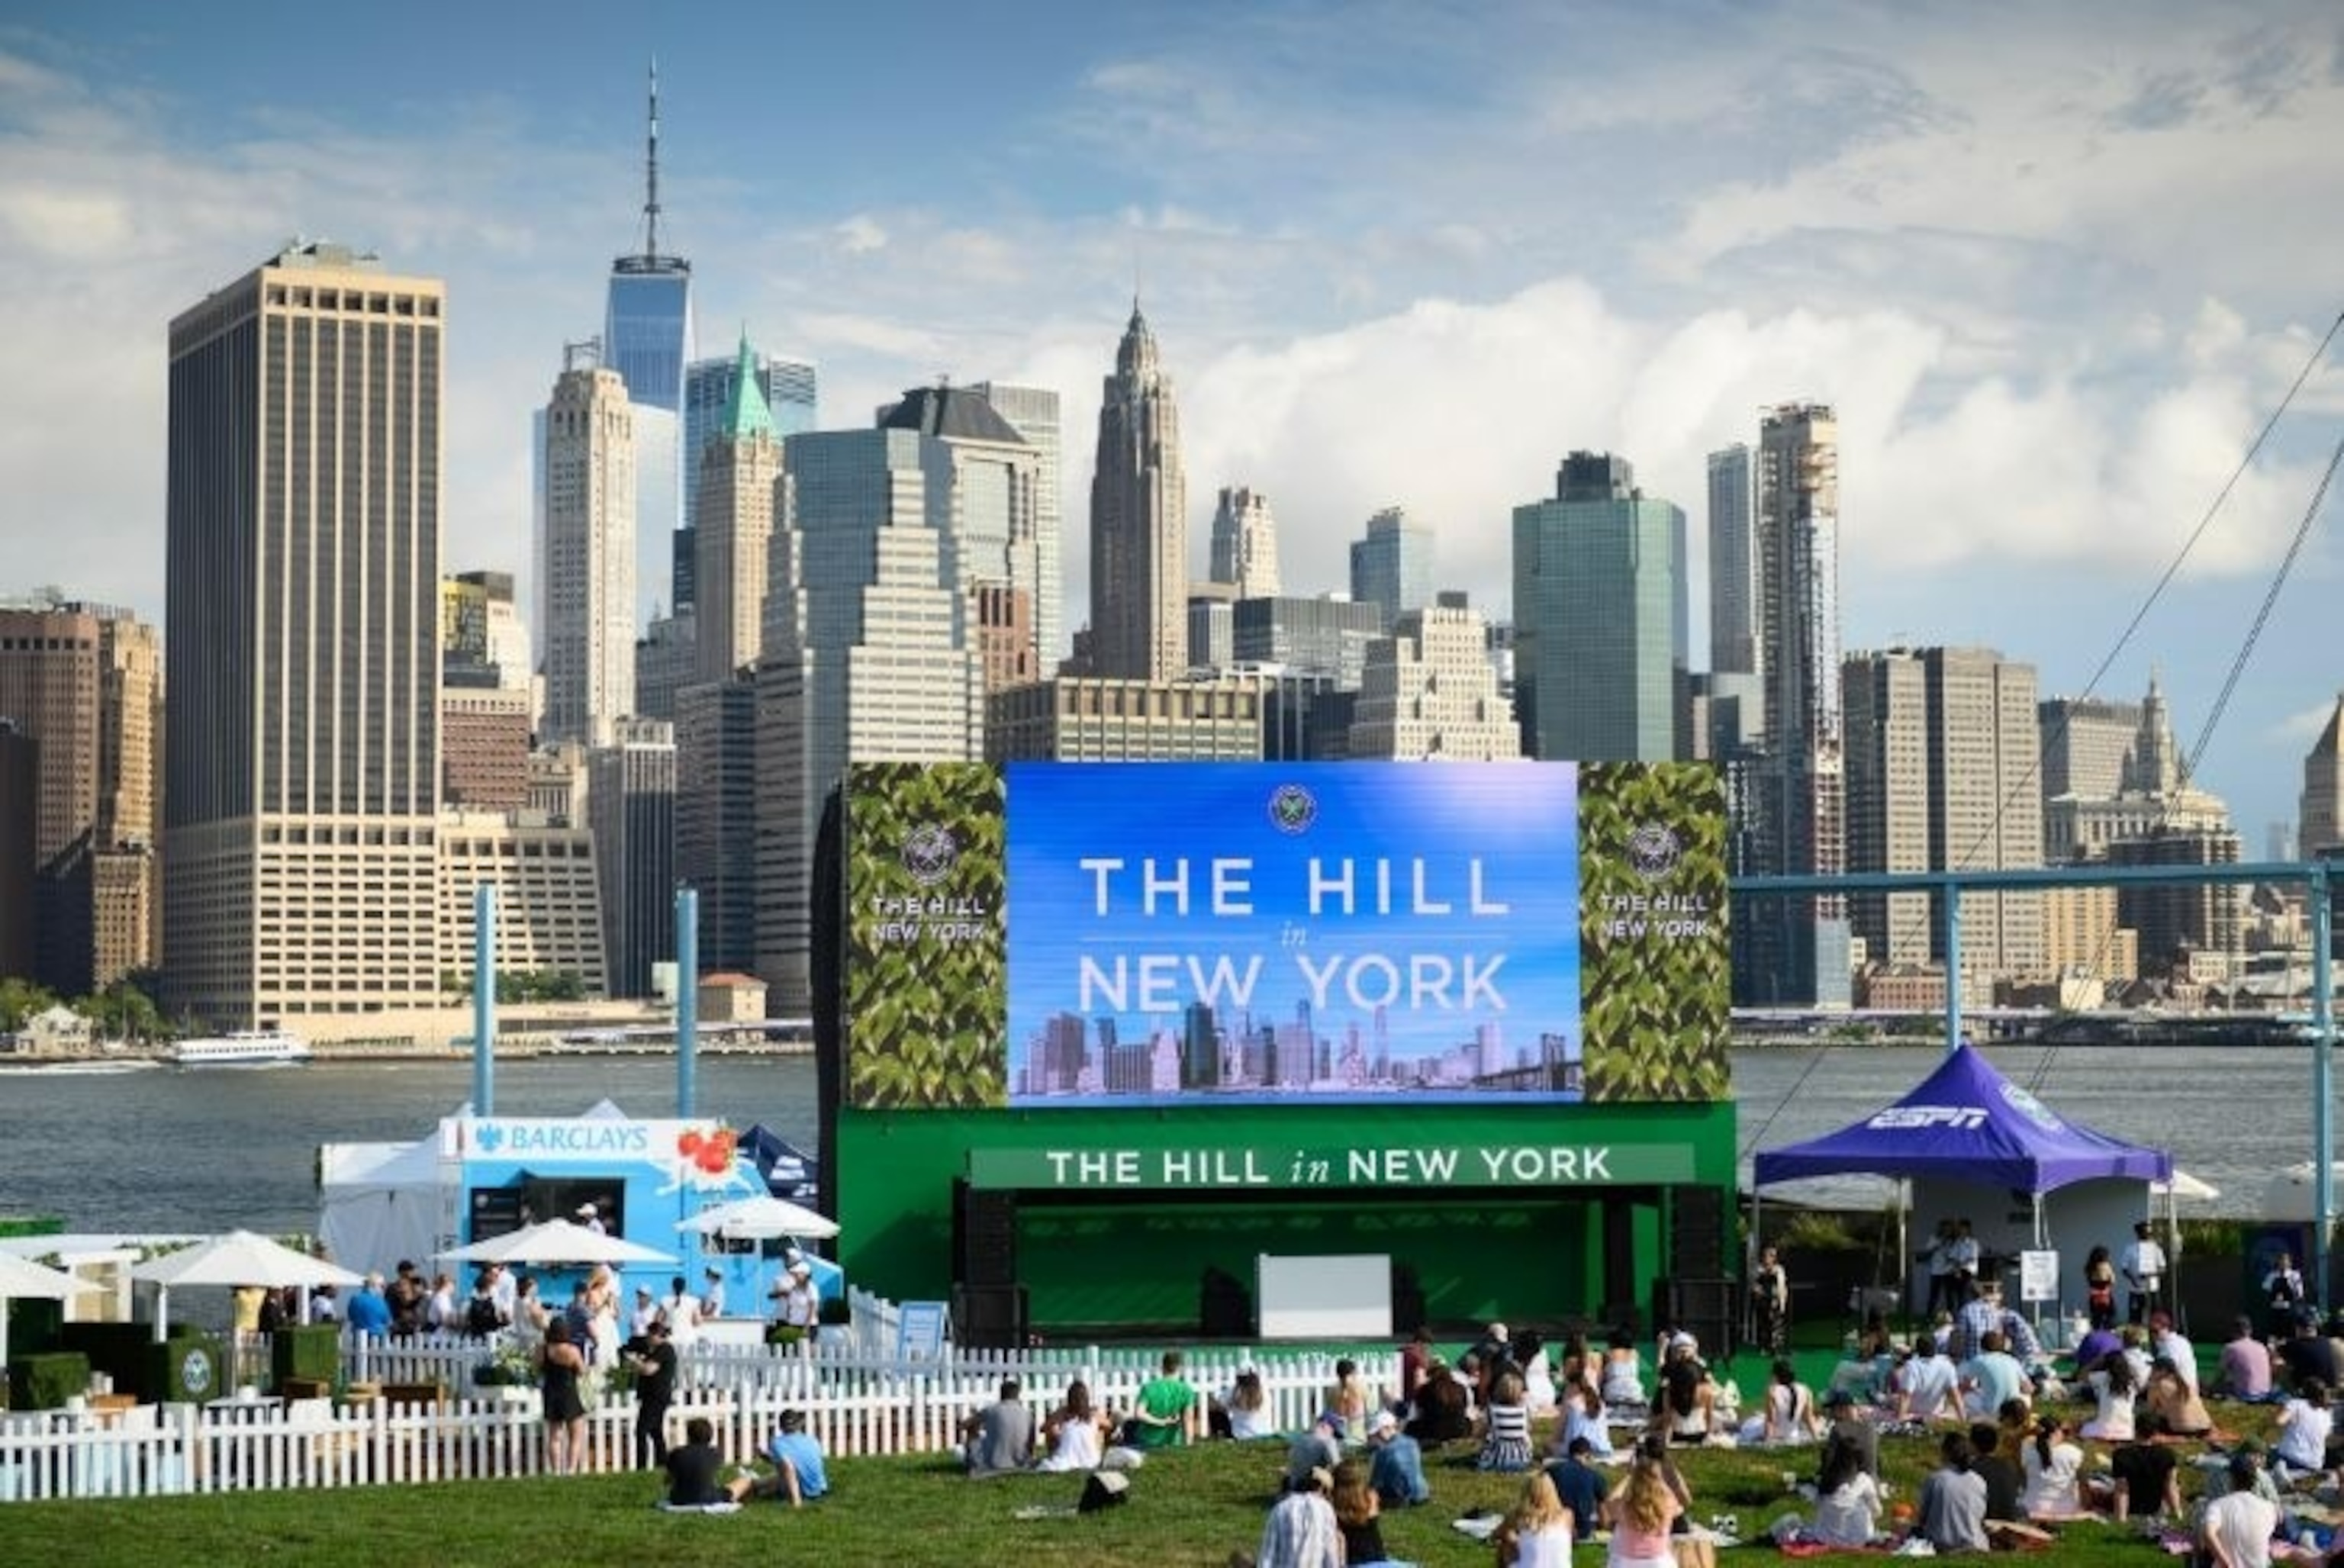 PHOTO: Views from The Hill in New York 2023.